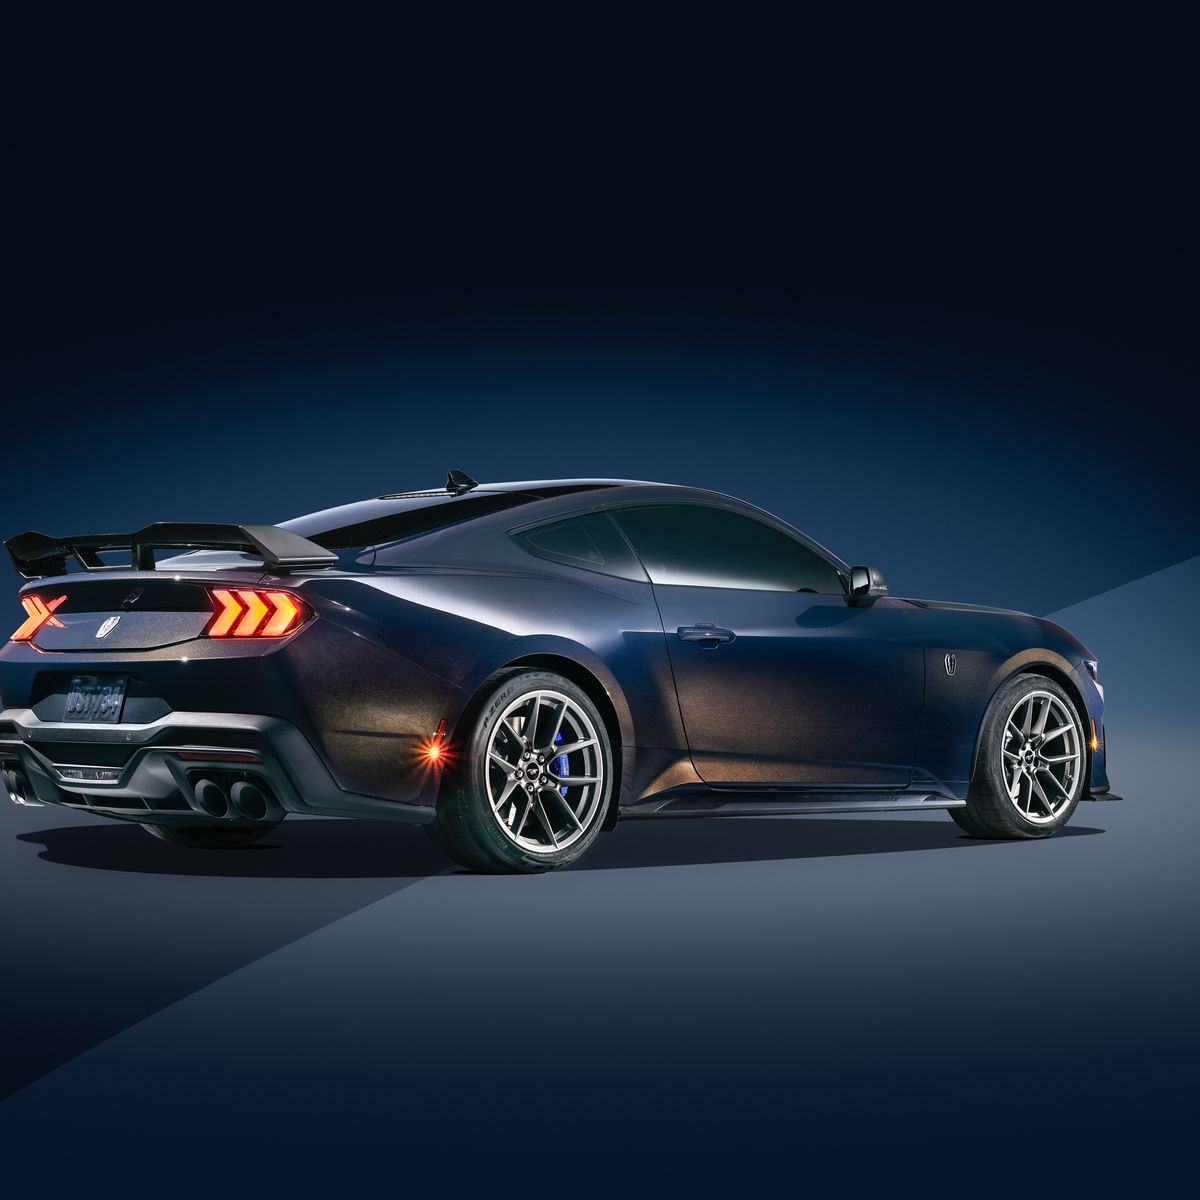 2023 Ford Mustang Dark Horse Is the New Pony Car King